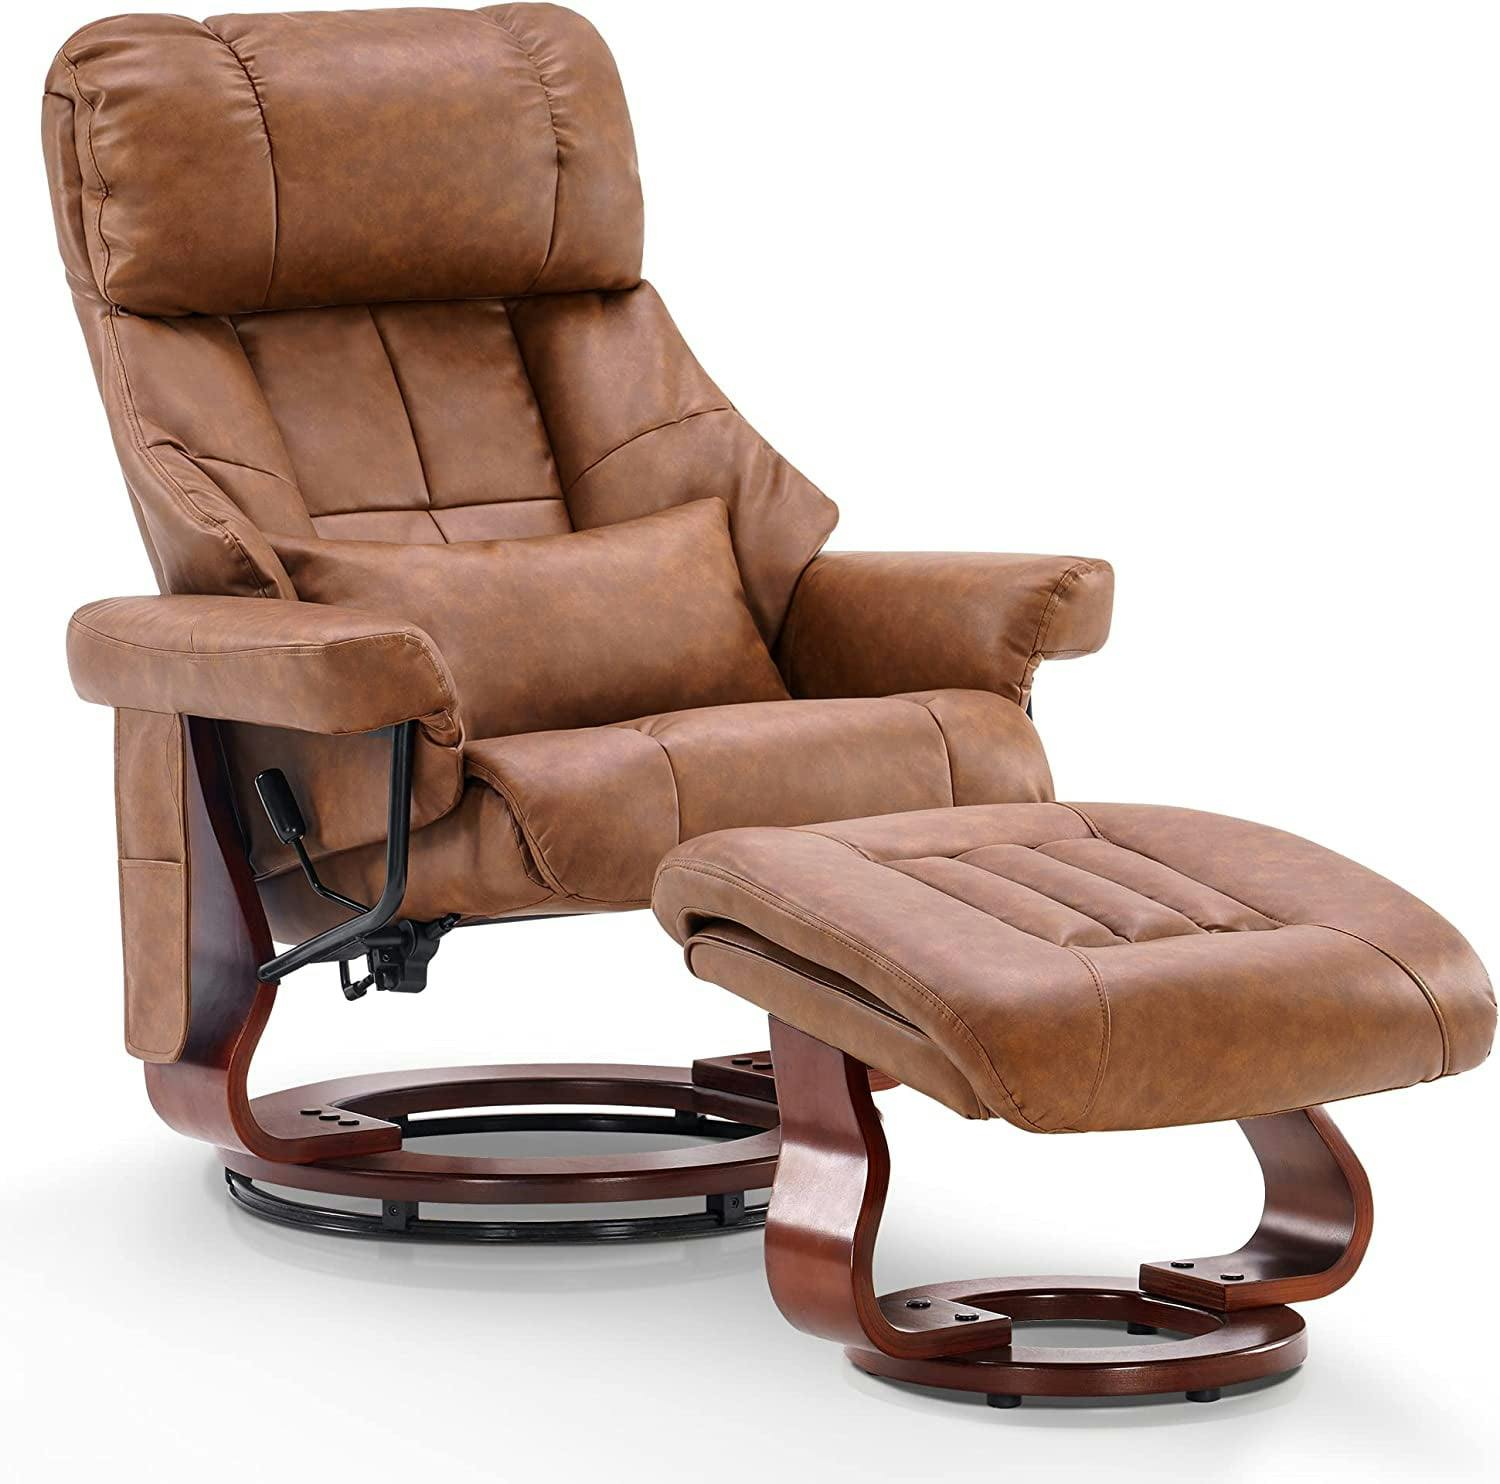 Saddle Swivel Recliner with Ottoman and Vibration Massage in Faux Leather